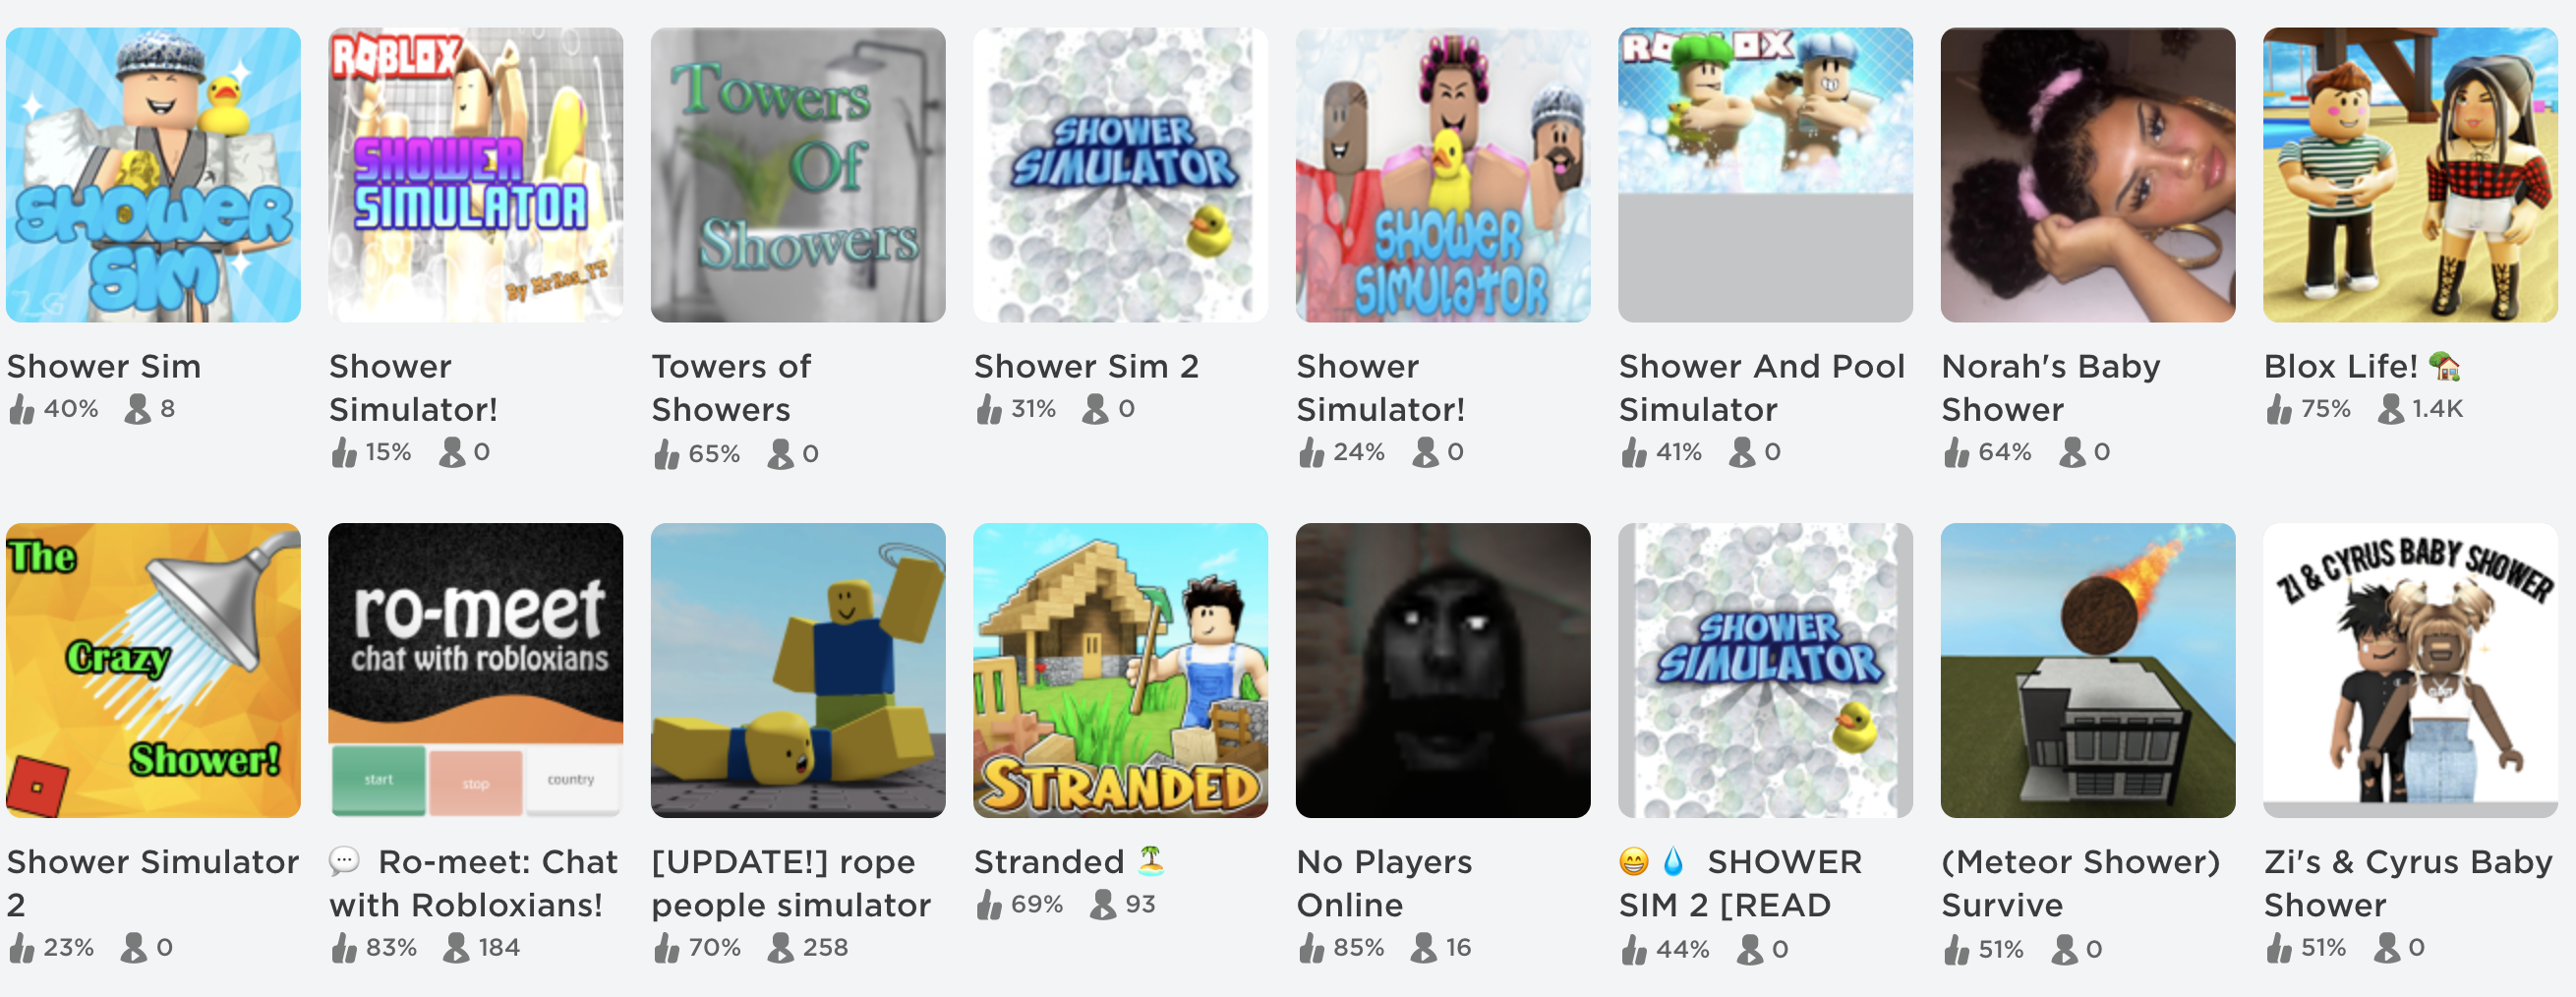 Roblox To Develop Improved Parental Controls As It Struggles With Sexually Explicit Content - sexy games on roblox